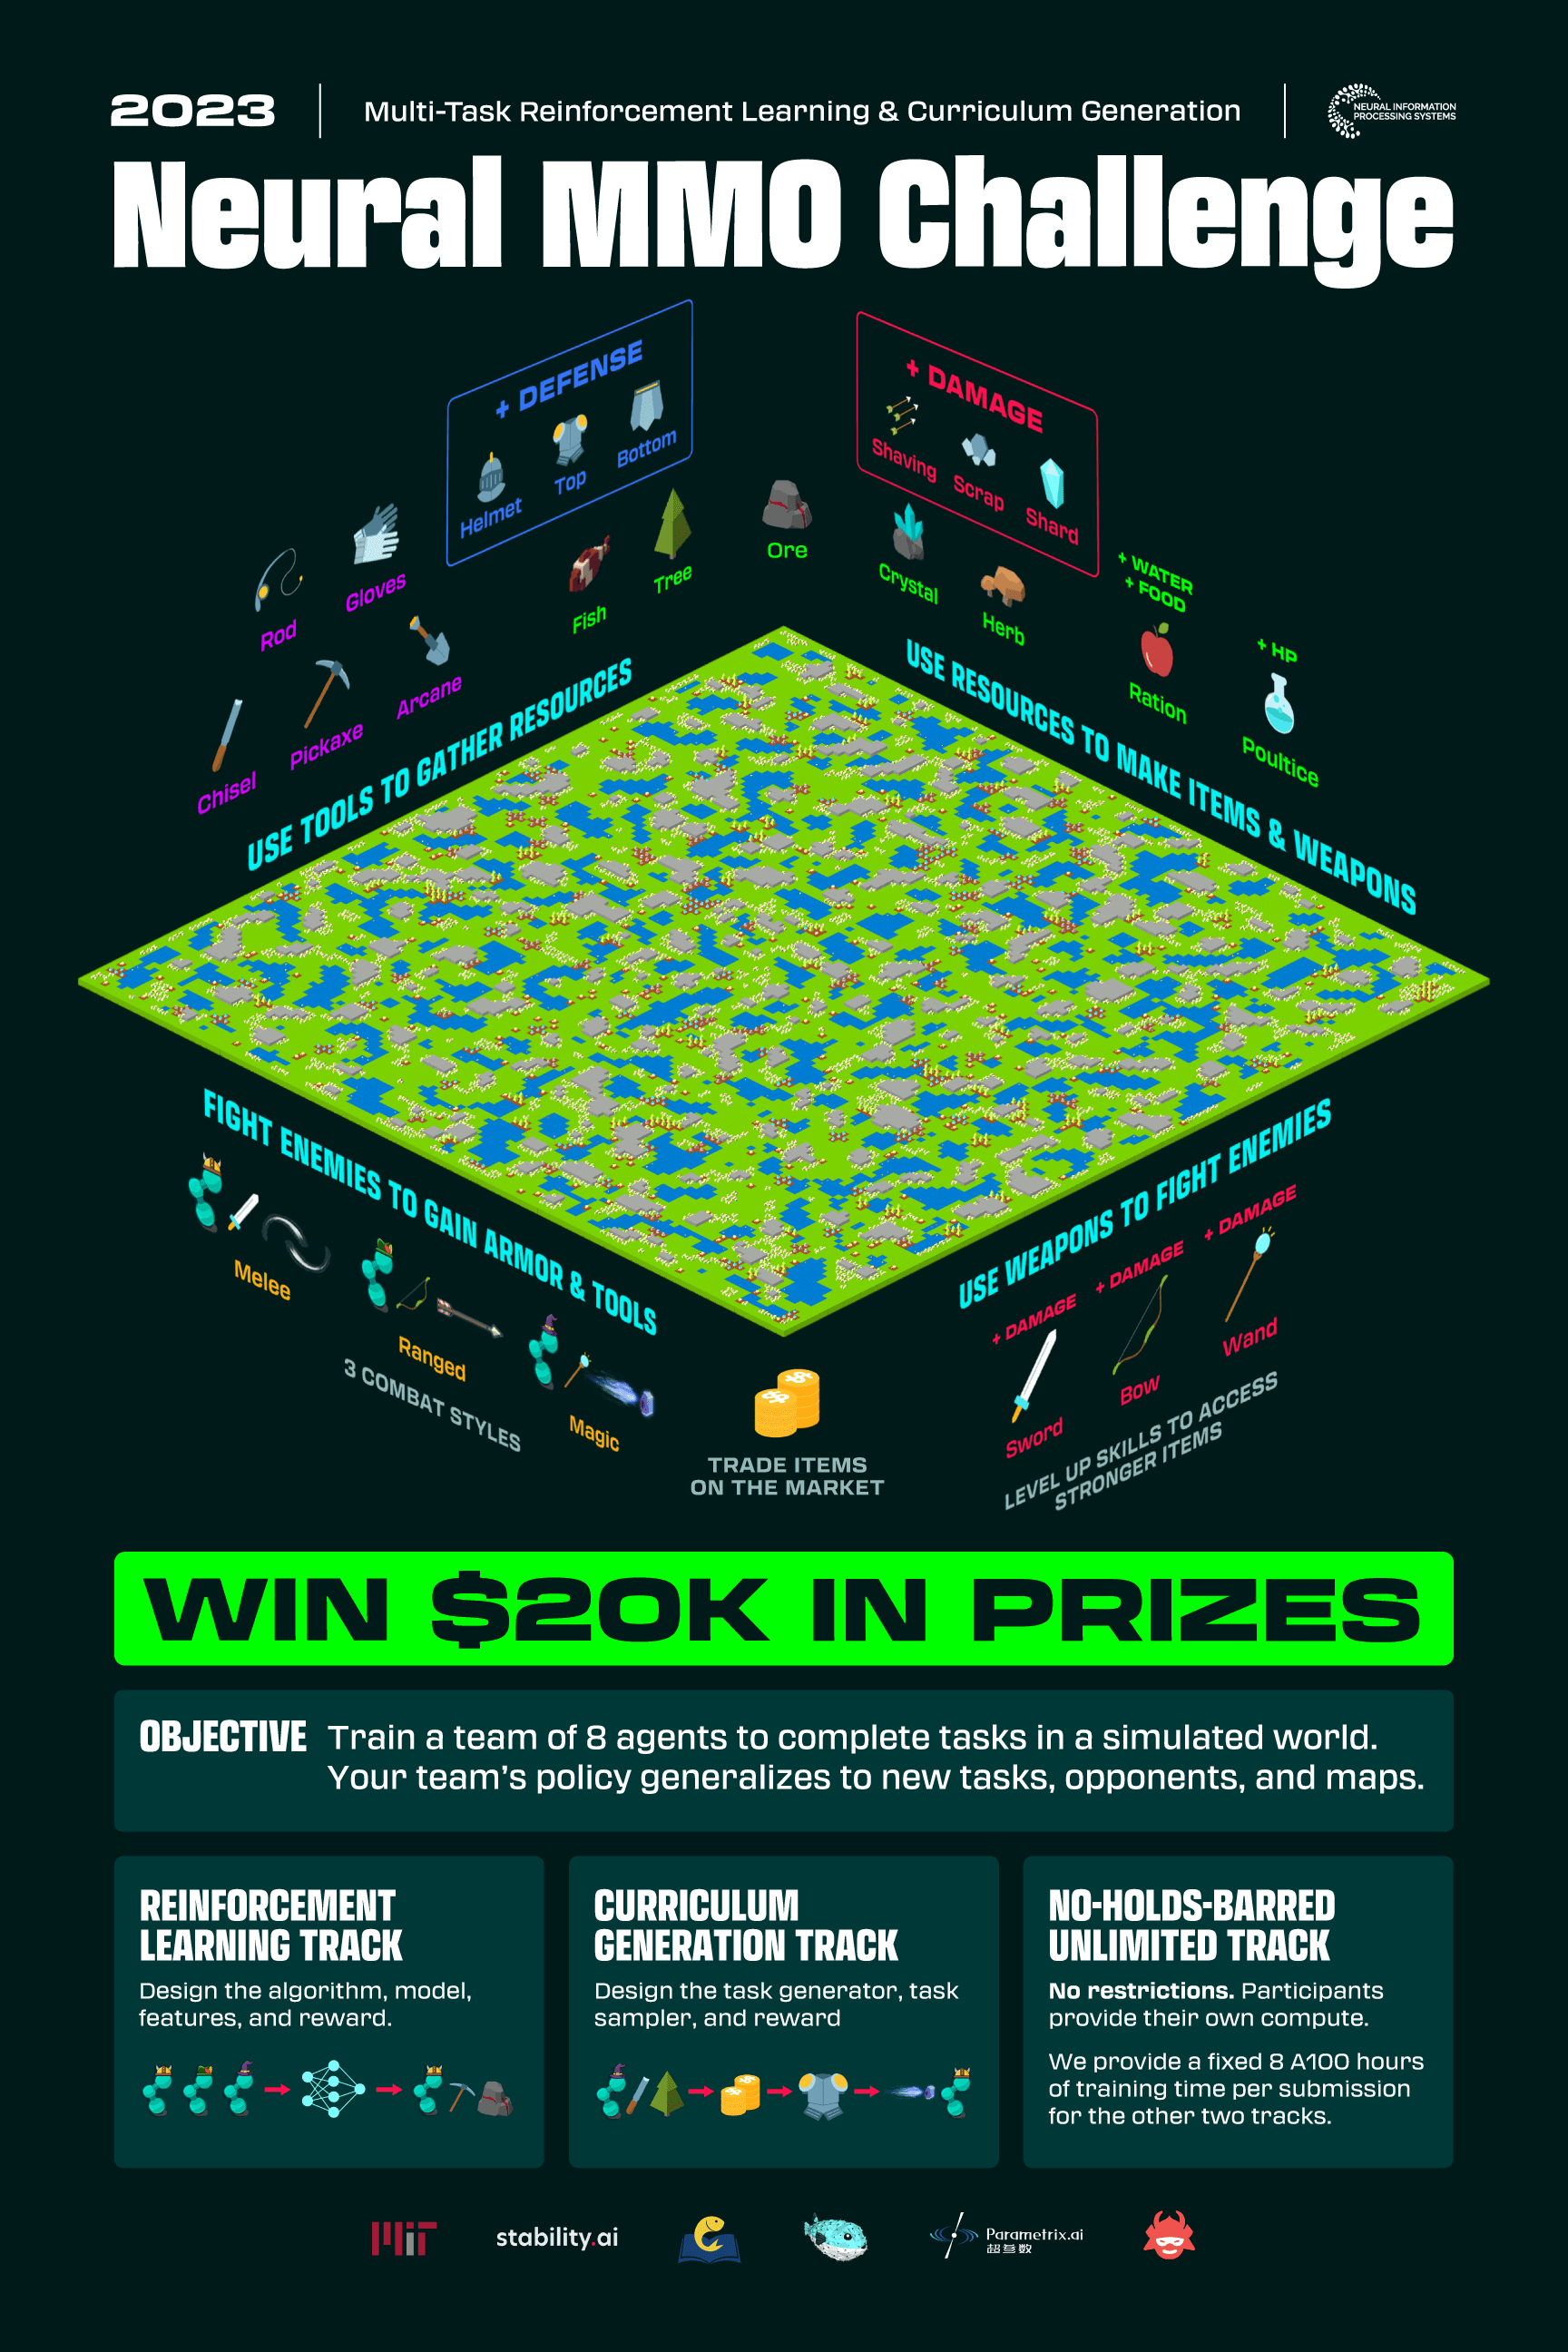 The poster for the Neural MMO Challenge